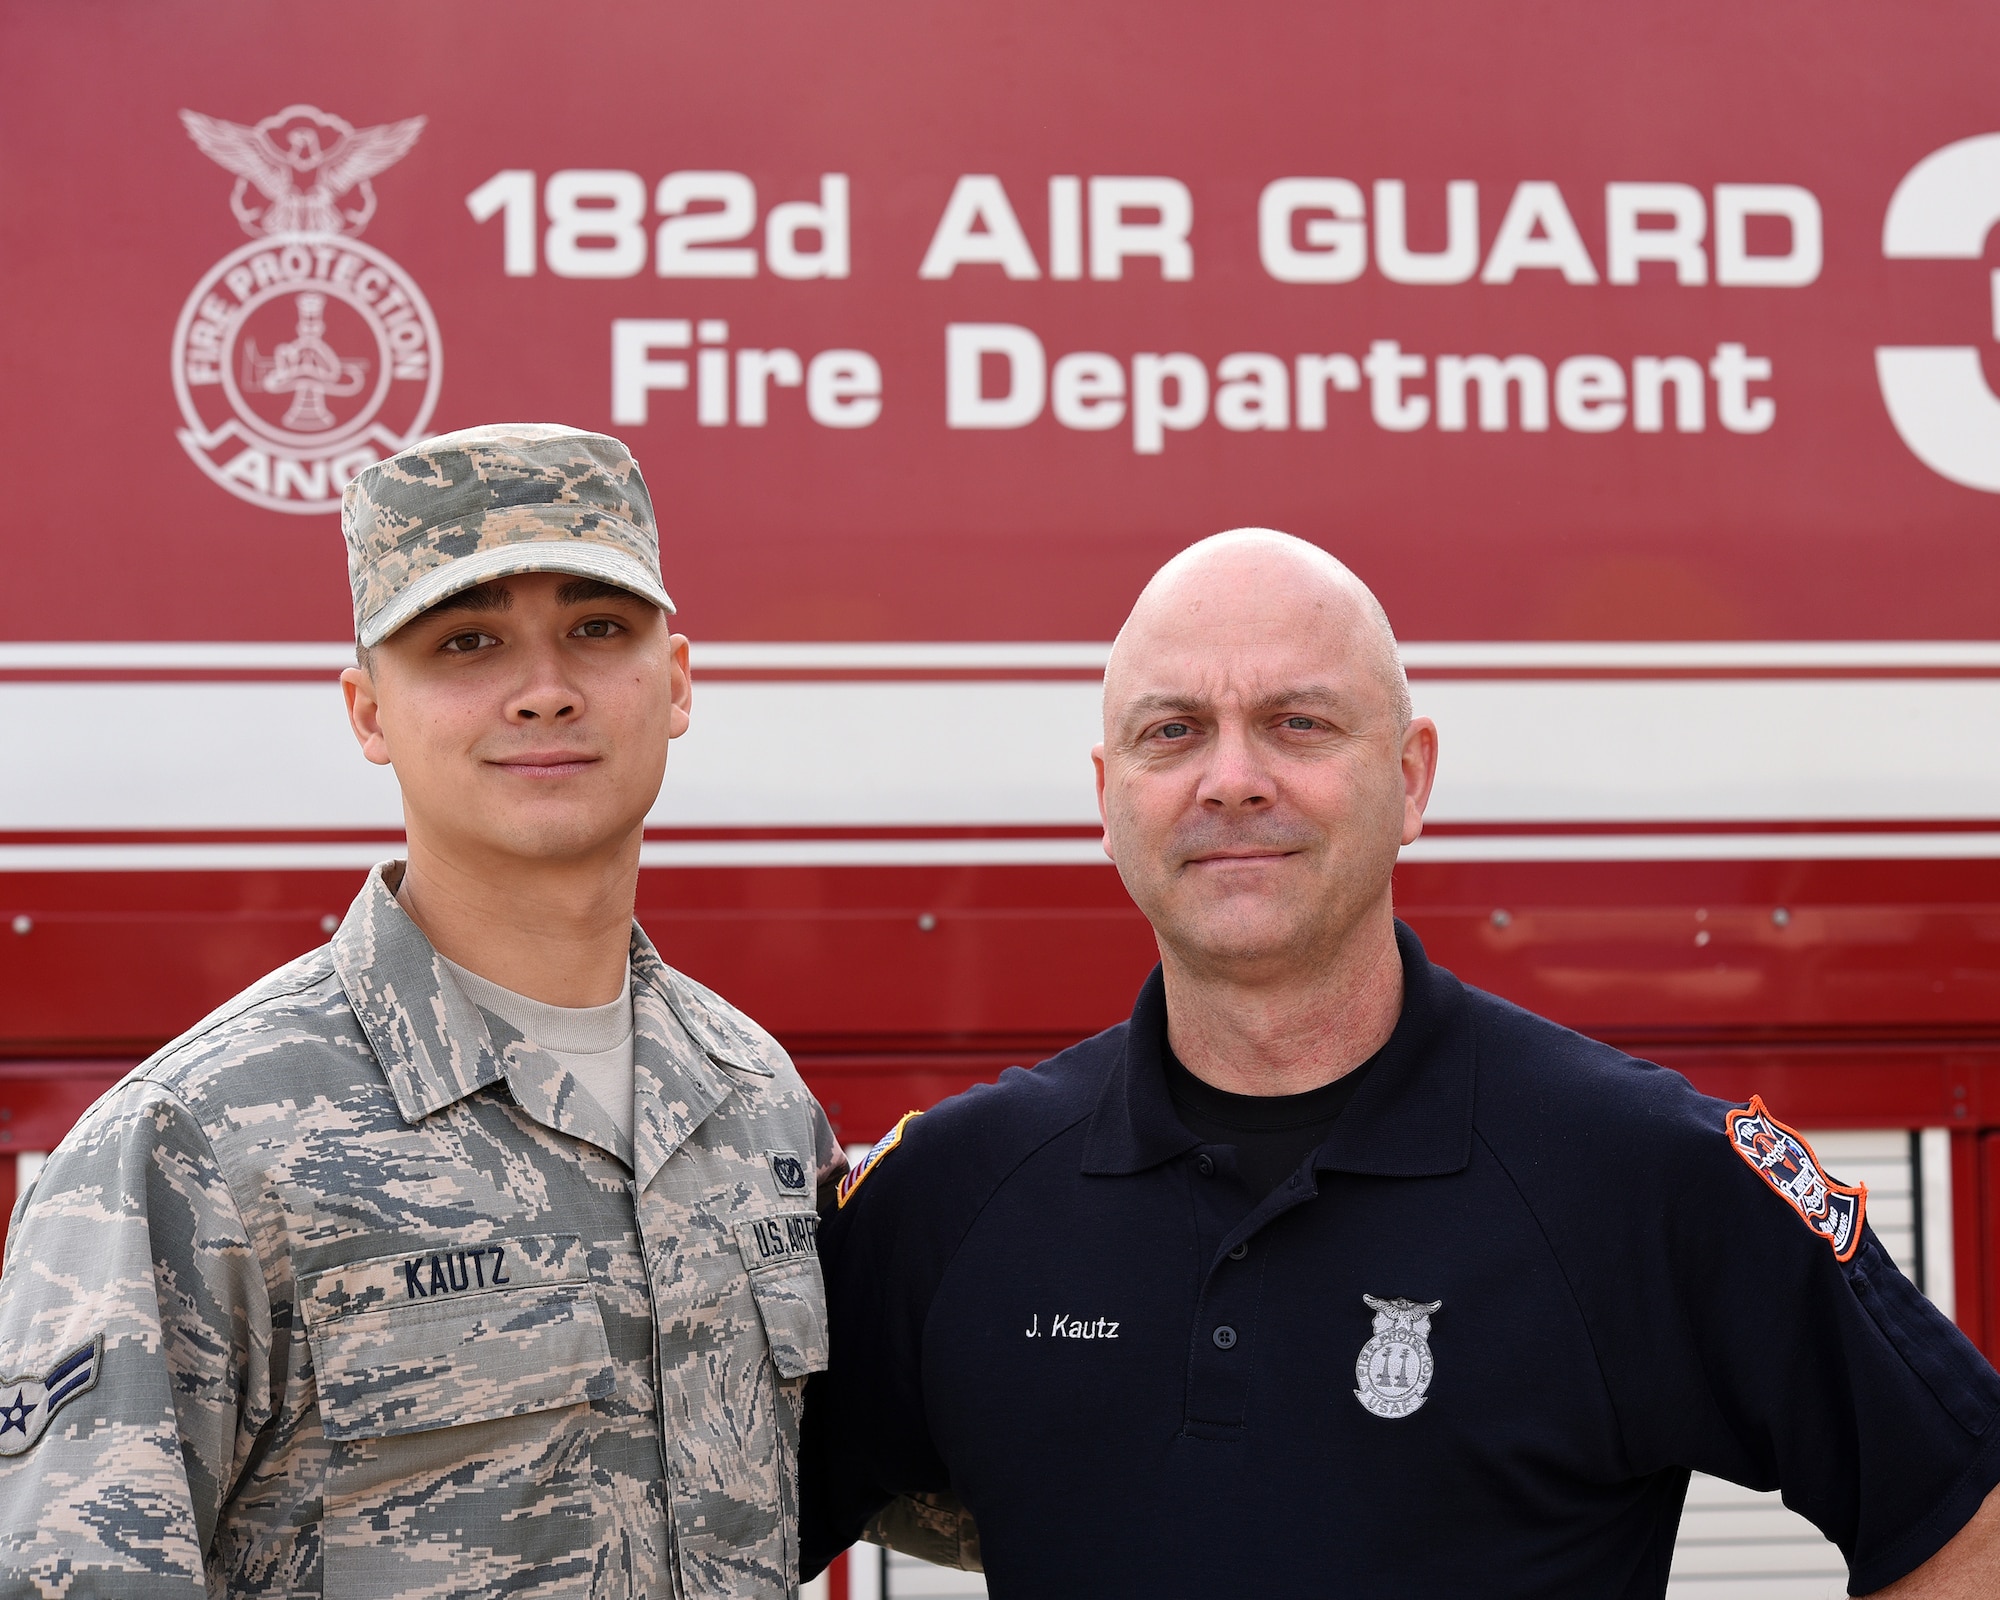 As John Kautz (right) an Illinois Air National Guard firefighter prepares for retirement, his son, Airman 1st Class Shawn Kautz, has already begun following his path to an identical career at the 182nd Airlift Wing in Peoria, Illinois. 